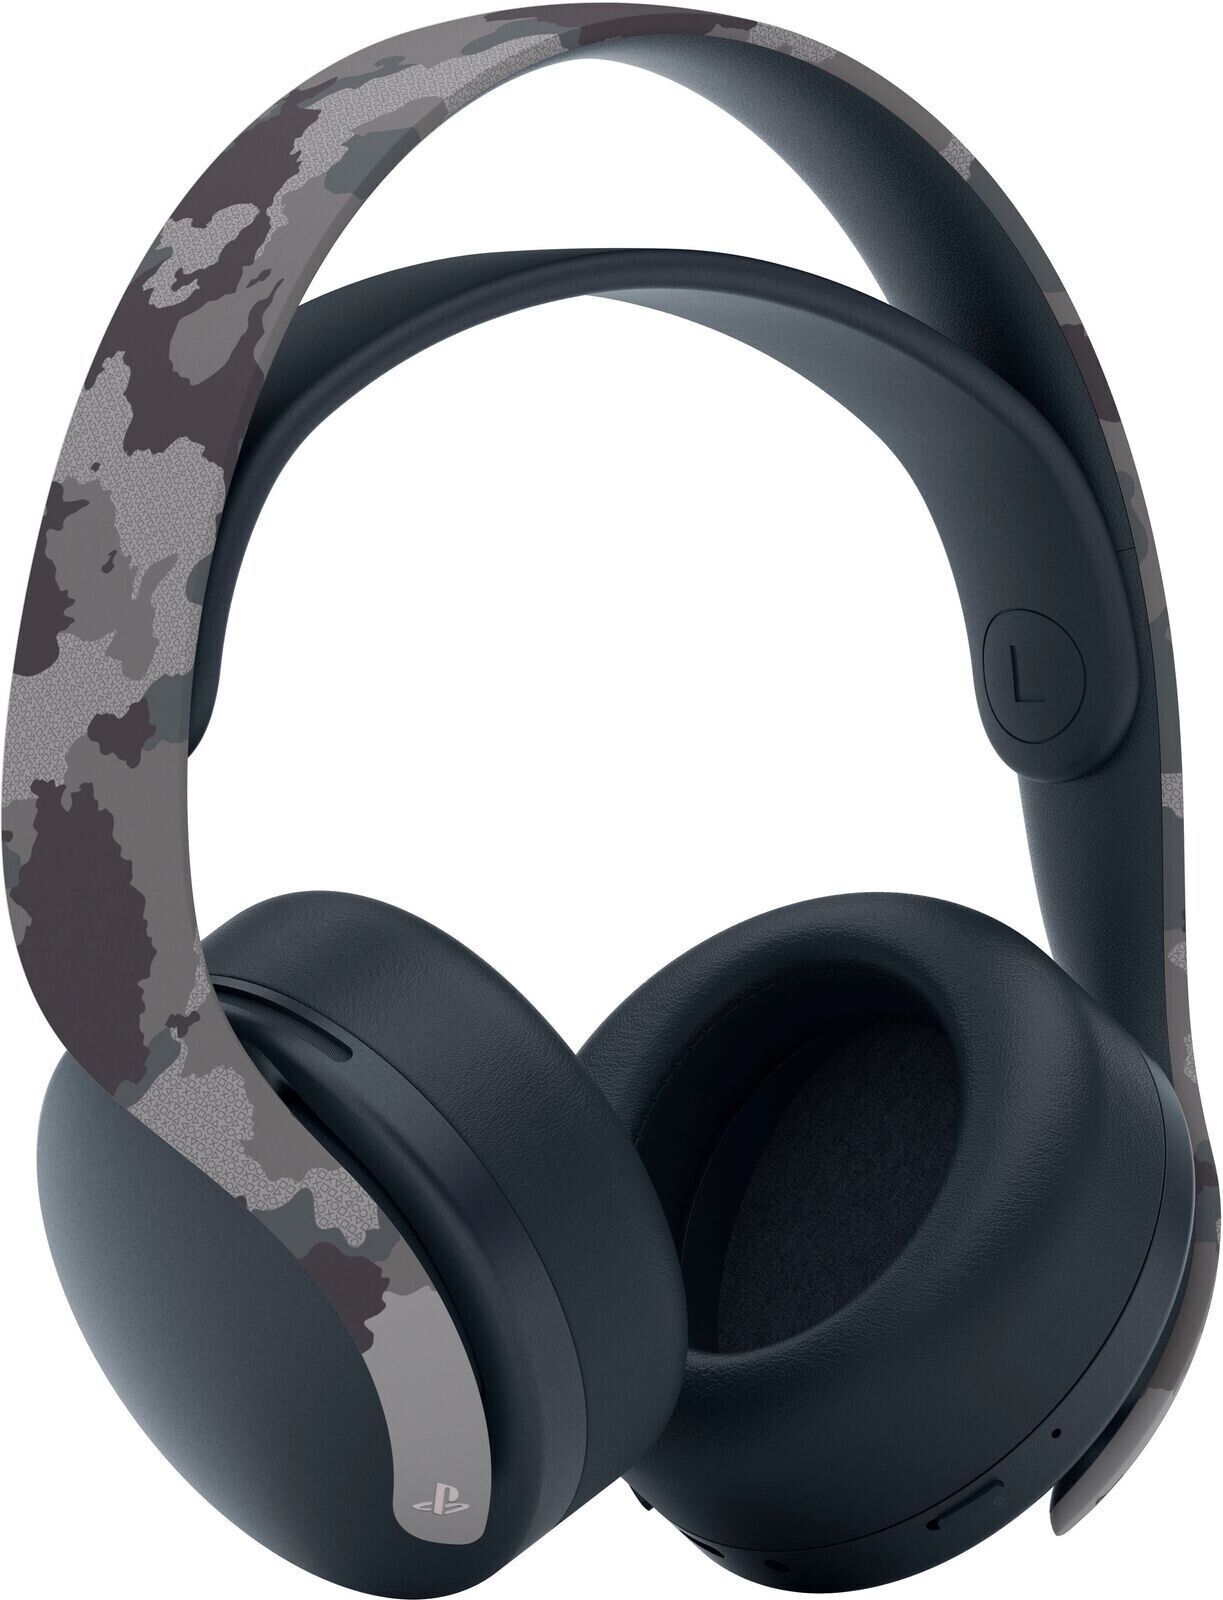 Sony Playstation 5 PULSE 3D Wireless Gaming Headset PS5 Camo NEW (Damaged Box) - $89.09